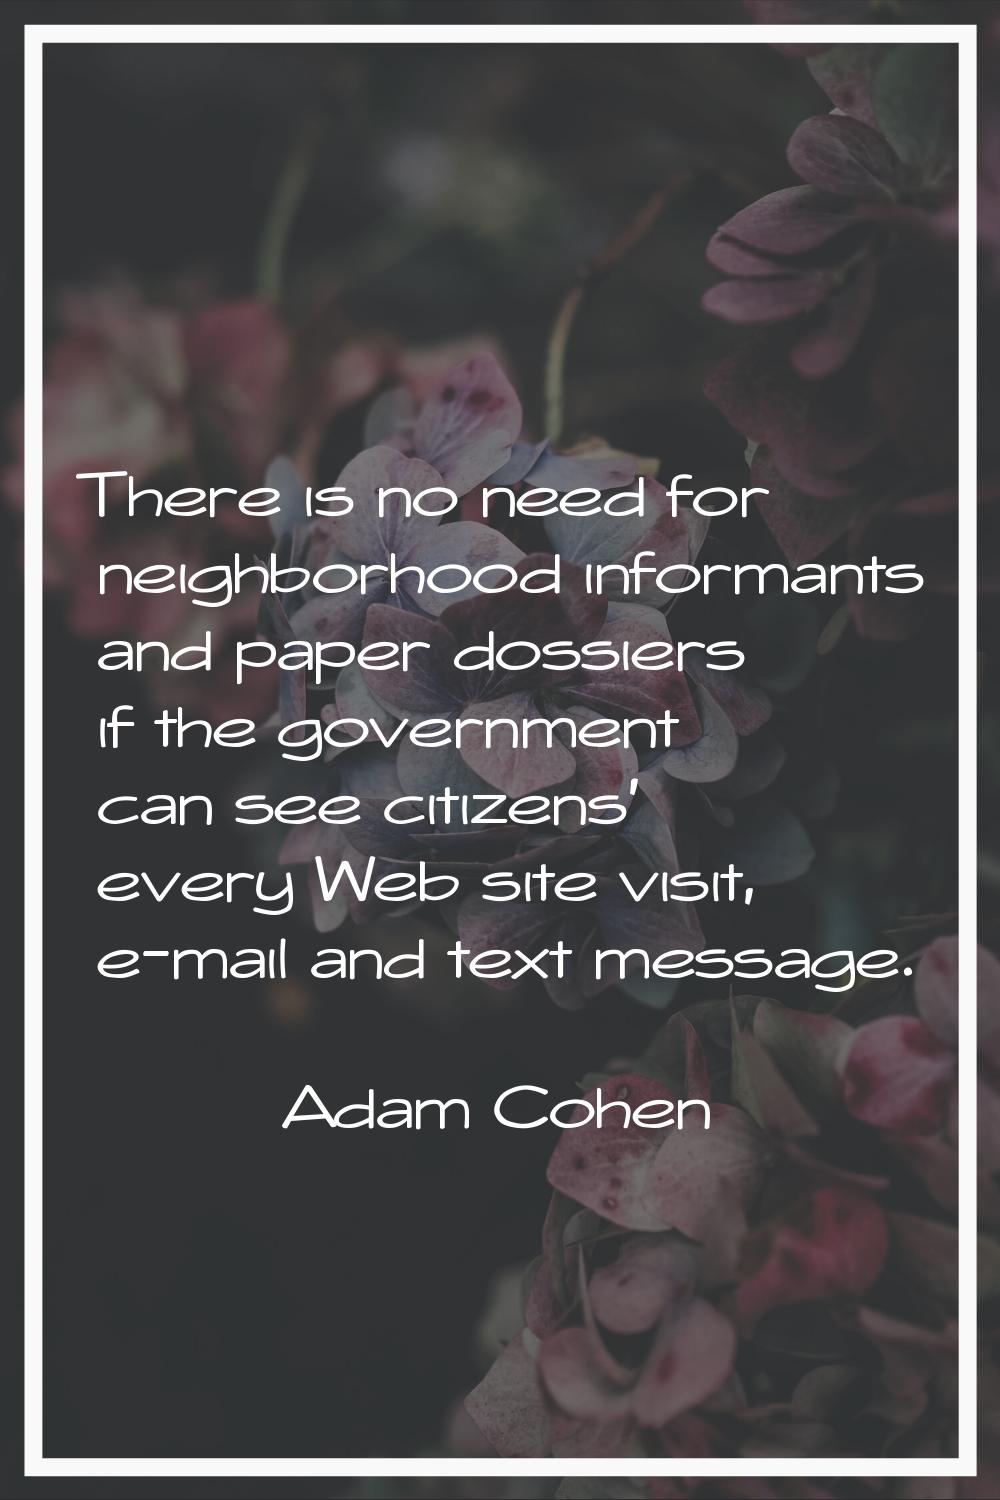 There is no need for neighborhood informants and paper dossiers if the government can see citizens'